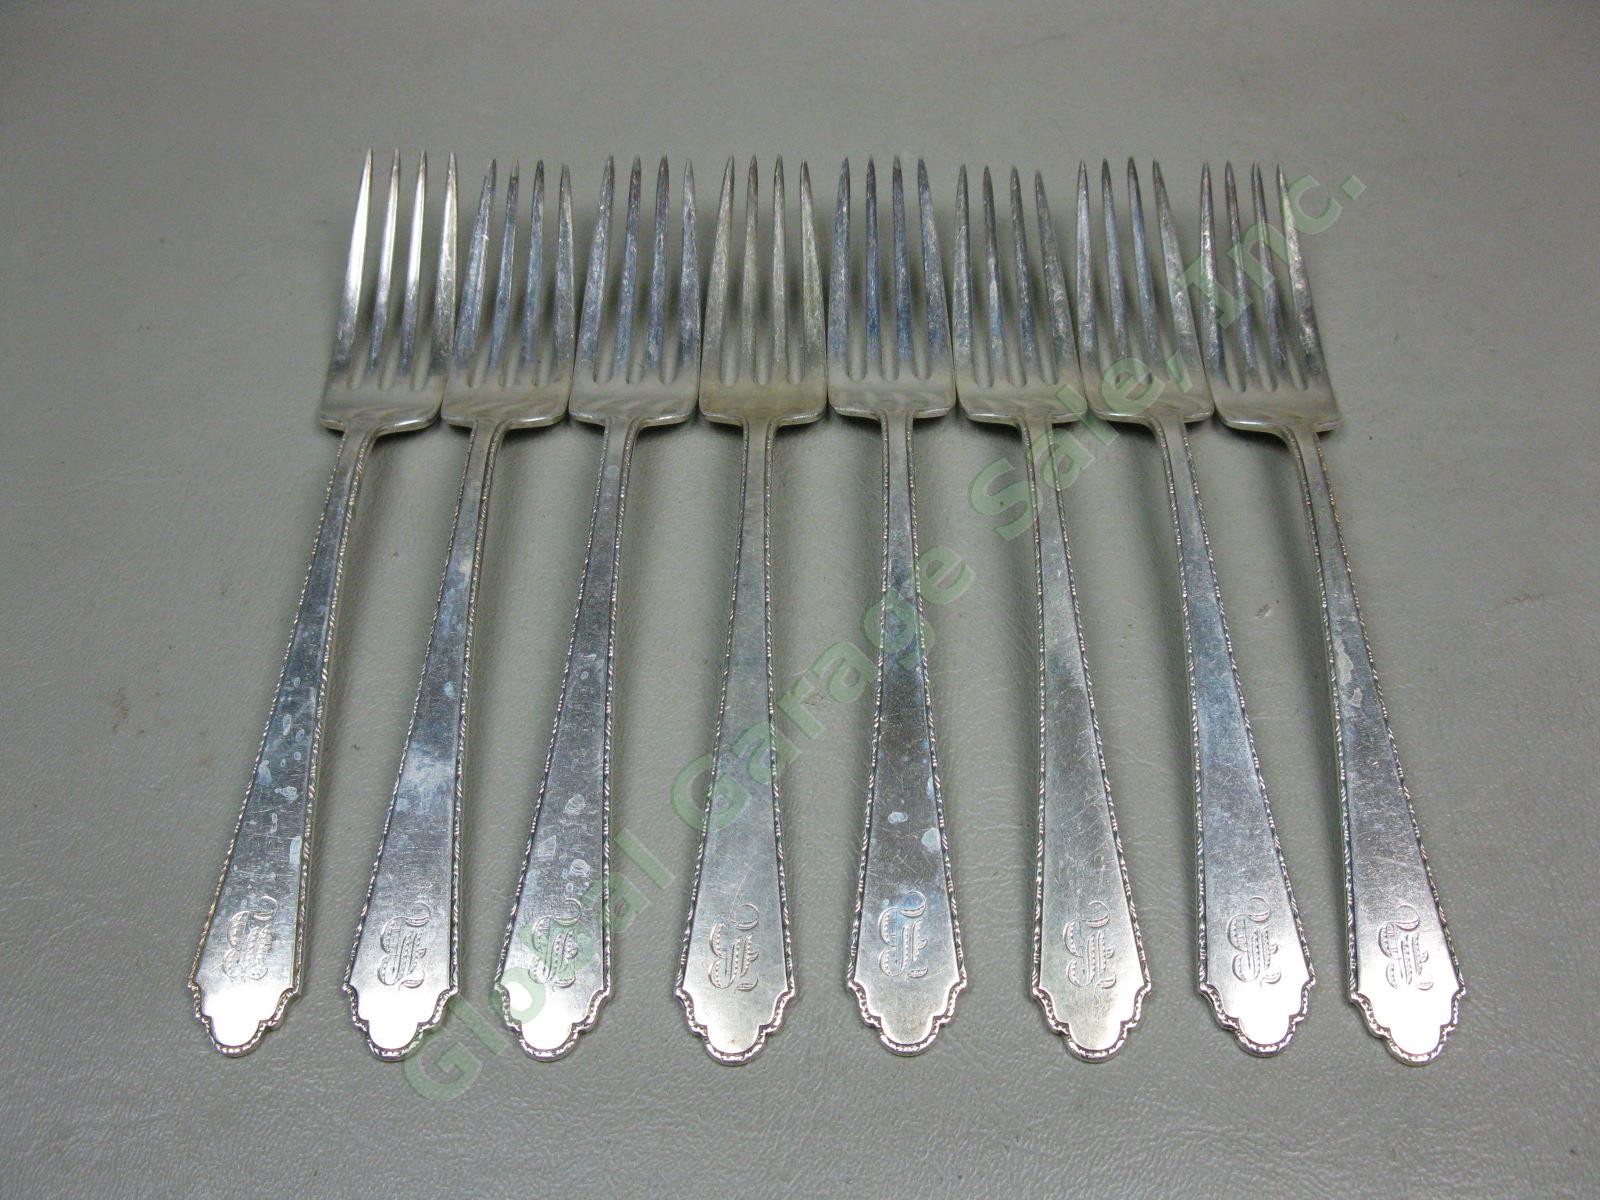 8 Rogers Lunt Bowlen Treasure William Mary Sterling Silver Dinner Forks Set 352g